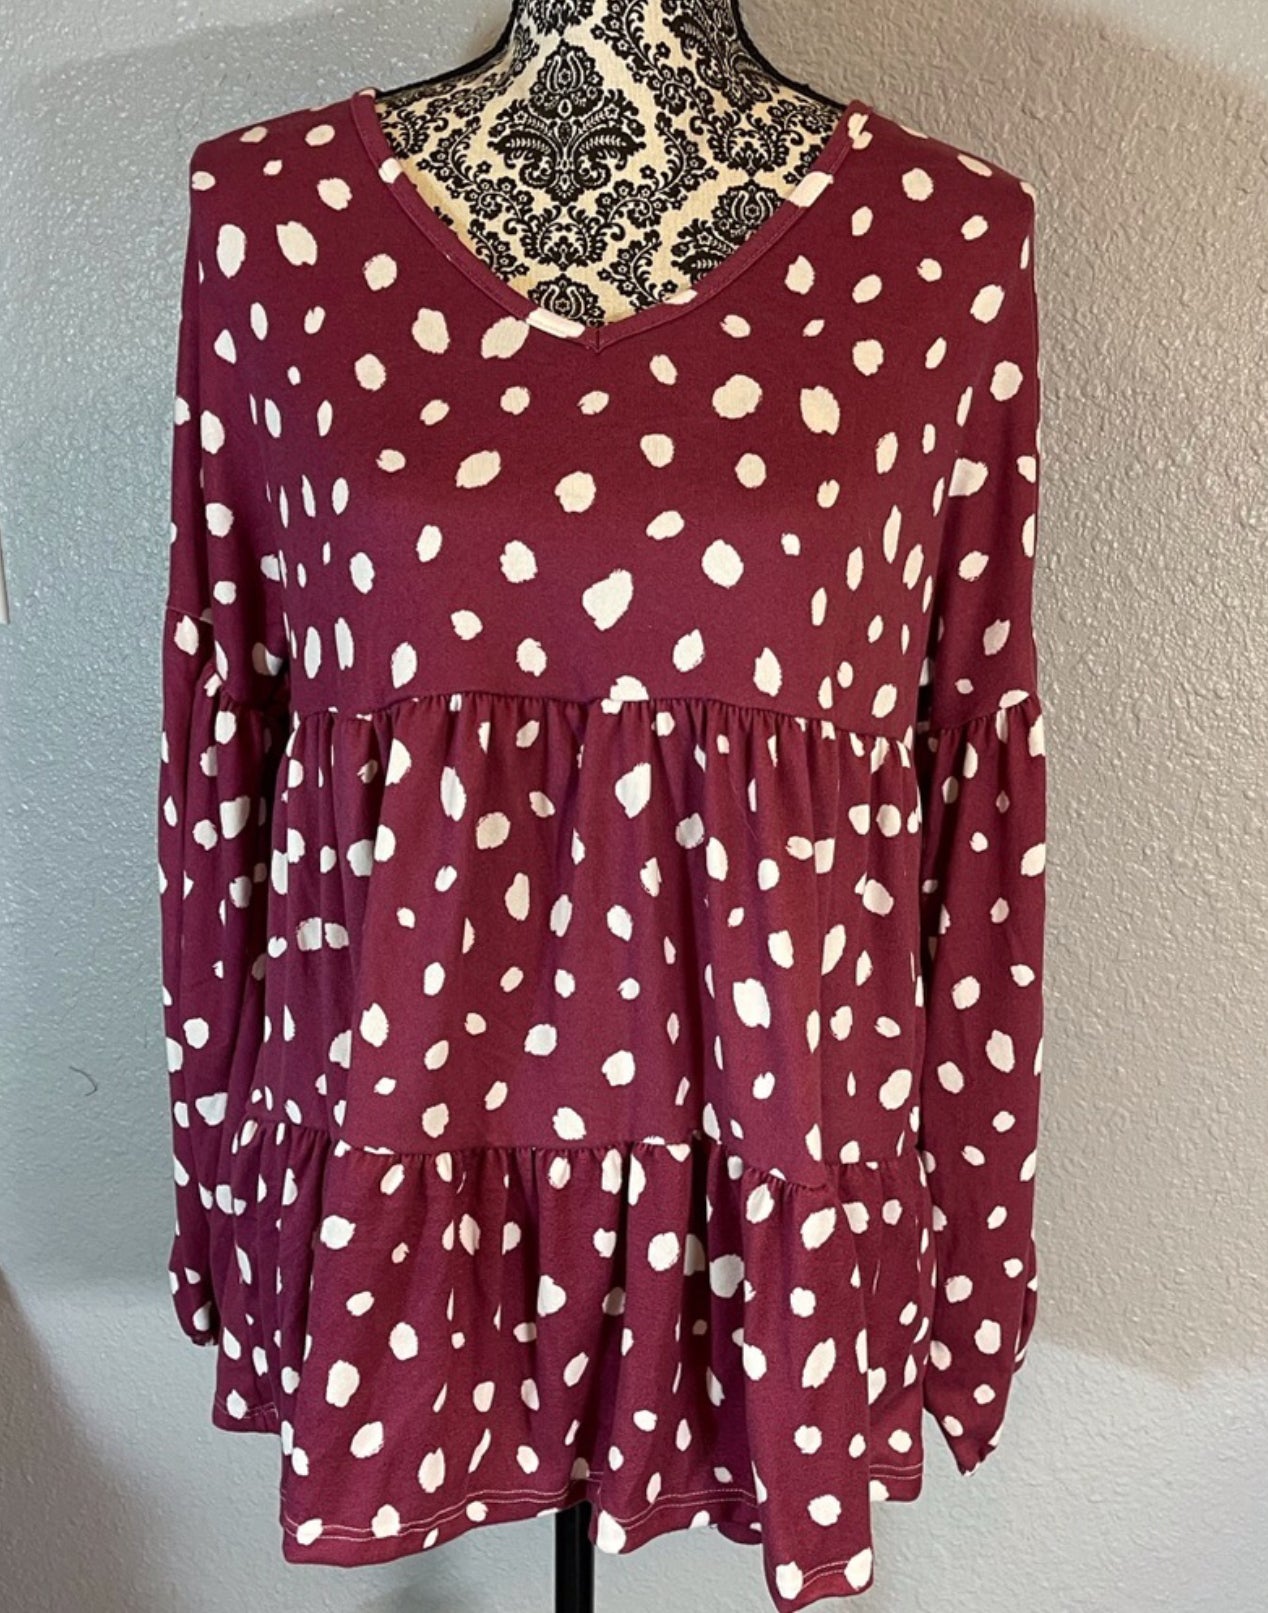 Burgundy spotted top